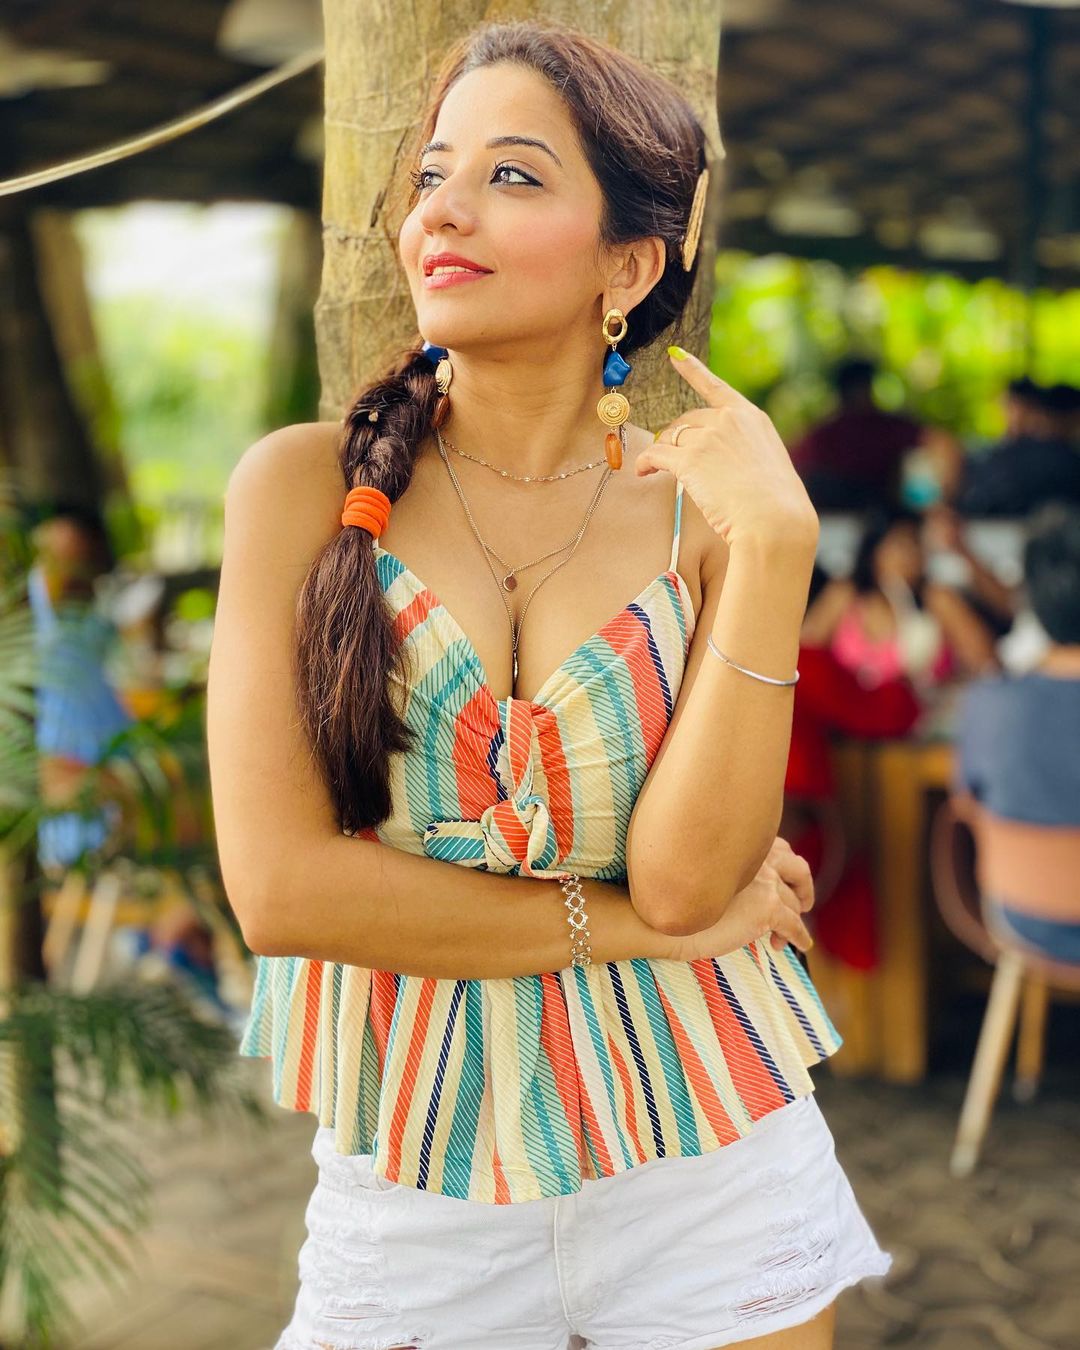 Monalisa aka Antara Biswas's HOT pictures from her Goa vacation goes viral! 6